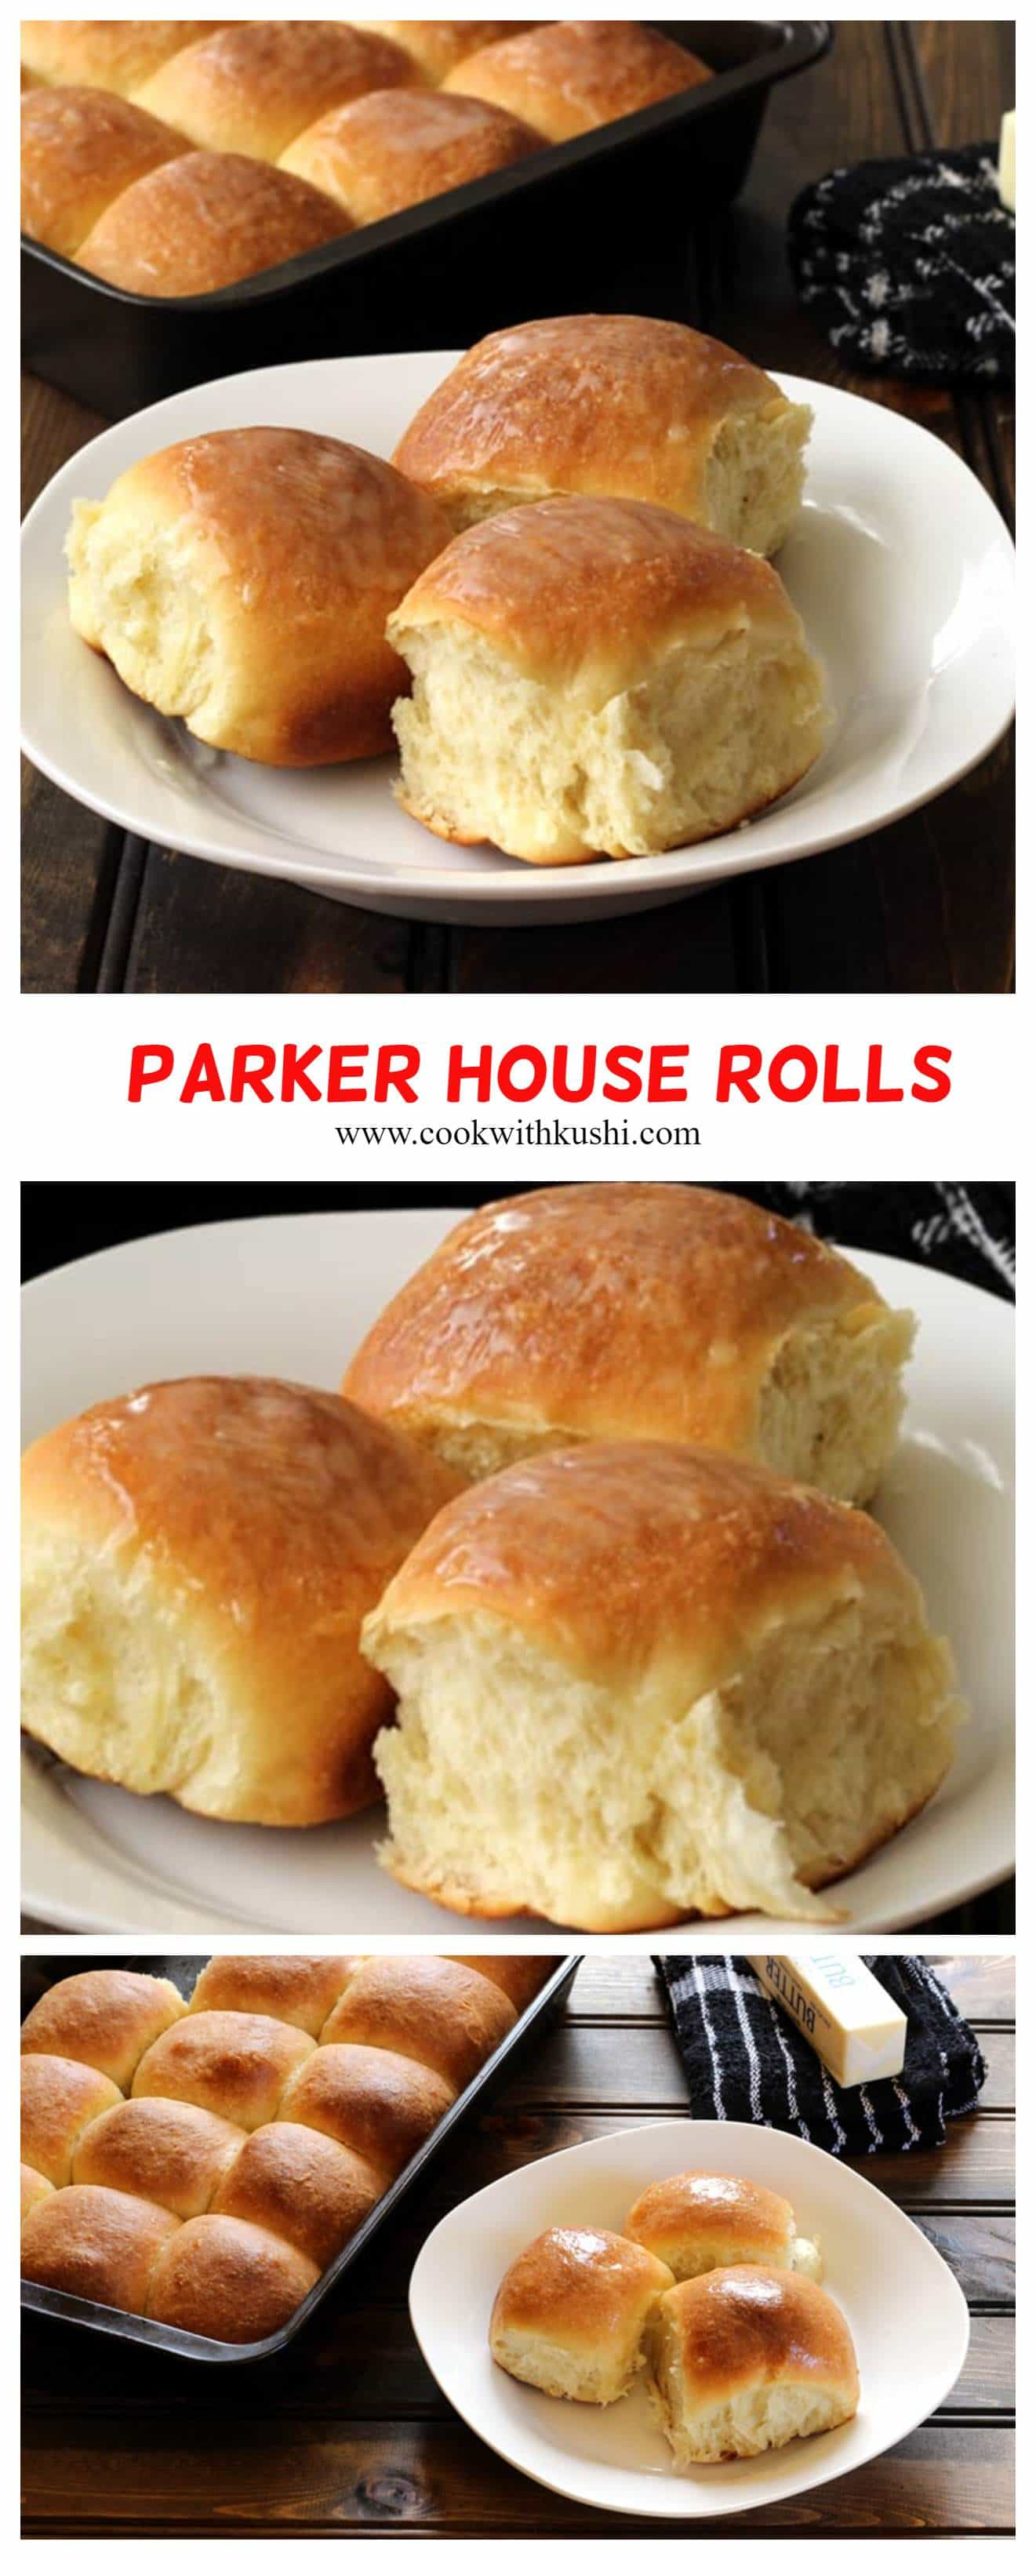 Parker House Rolls, Boston Based rolls are soft, irresistable and delicious, buttery and classic dinner rolls that are slighlty sweet and have a crispy exterior. #dinnerrolls#classicbread #yeastrolls #buns #thanksgivingside #dinnerrecipes #dinnerideas #briochebuns #homemaderolls #christmassides